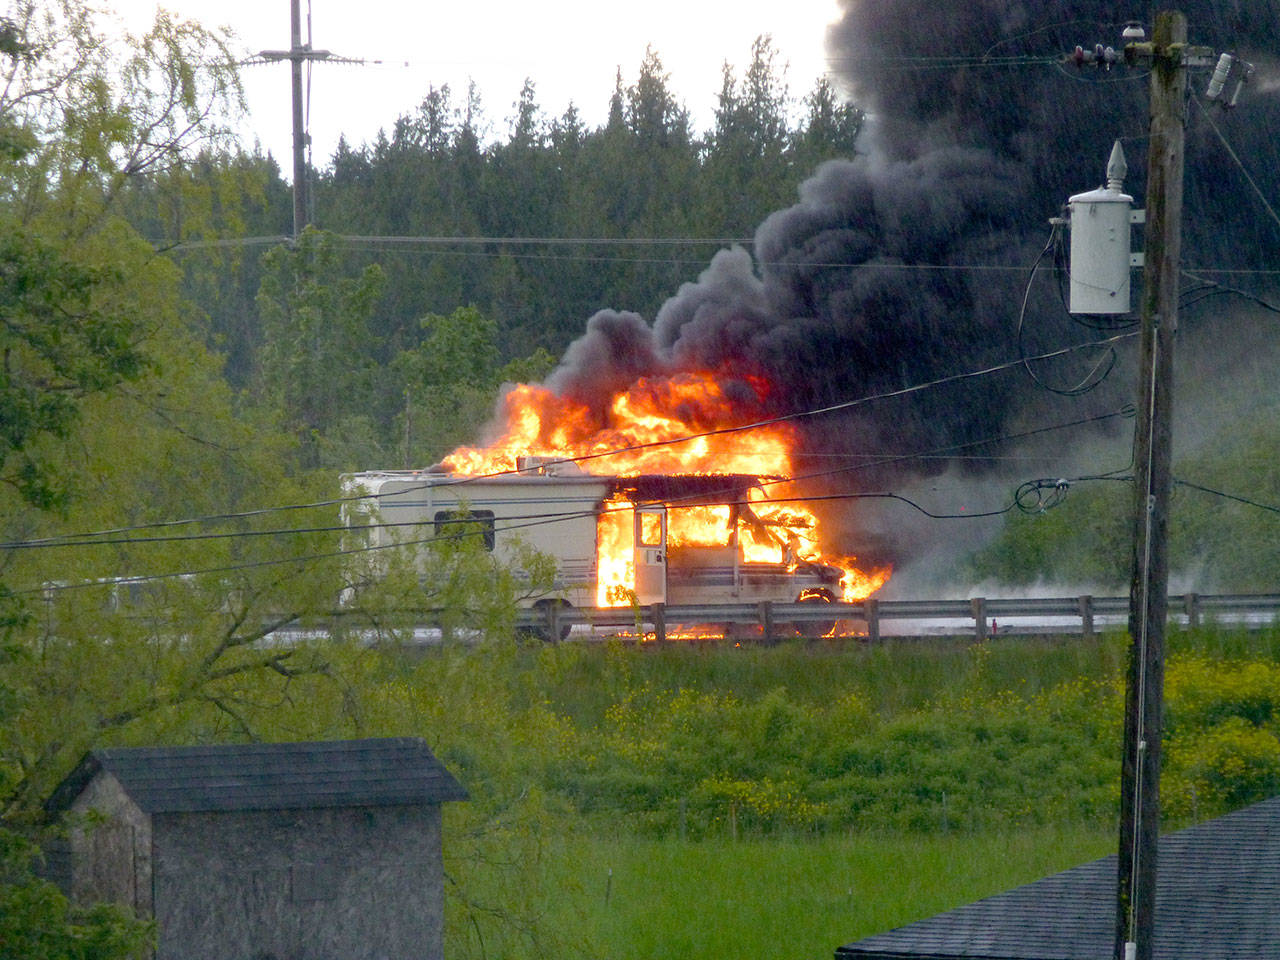 No injuries were reported in this recreational vehicle fire on U.S. Highway 101 east of Sequim on Sunday. (Pauline Geraci)